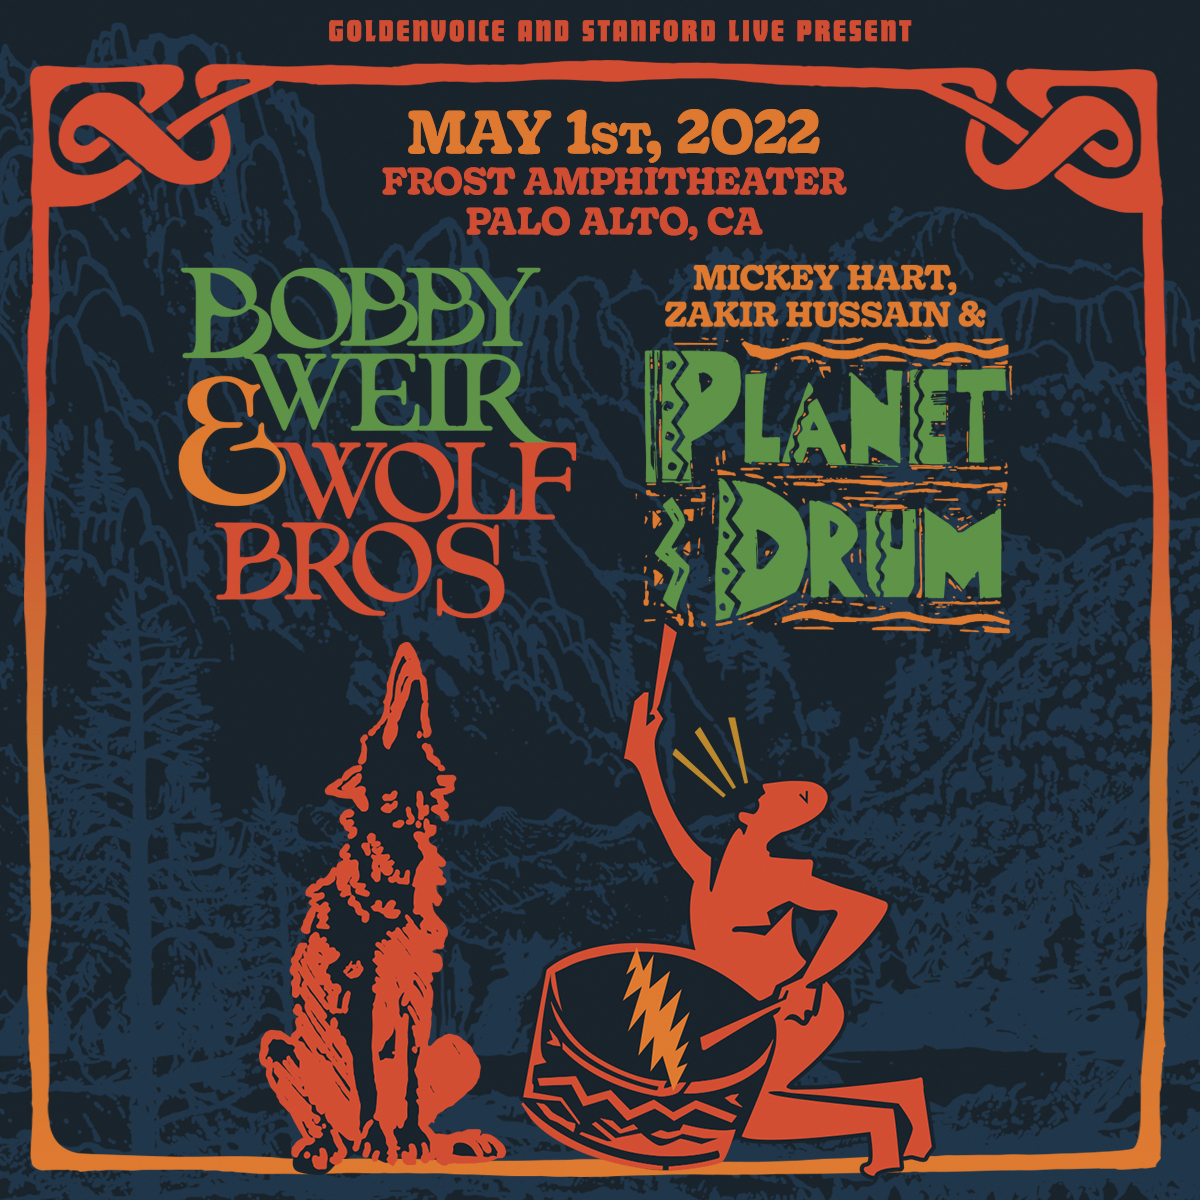 Just Announced! Bobby Weir & Wolf Bros Will Join Planet Drum at The Frost